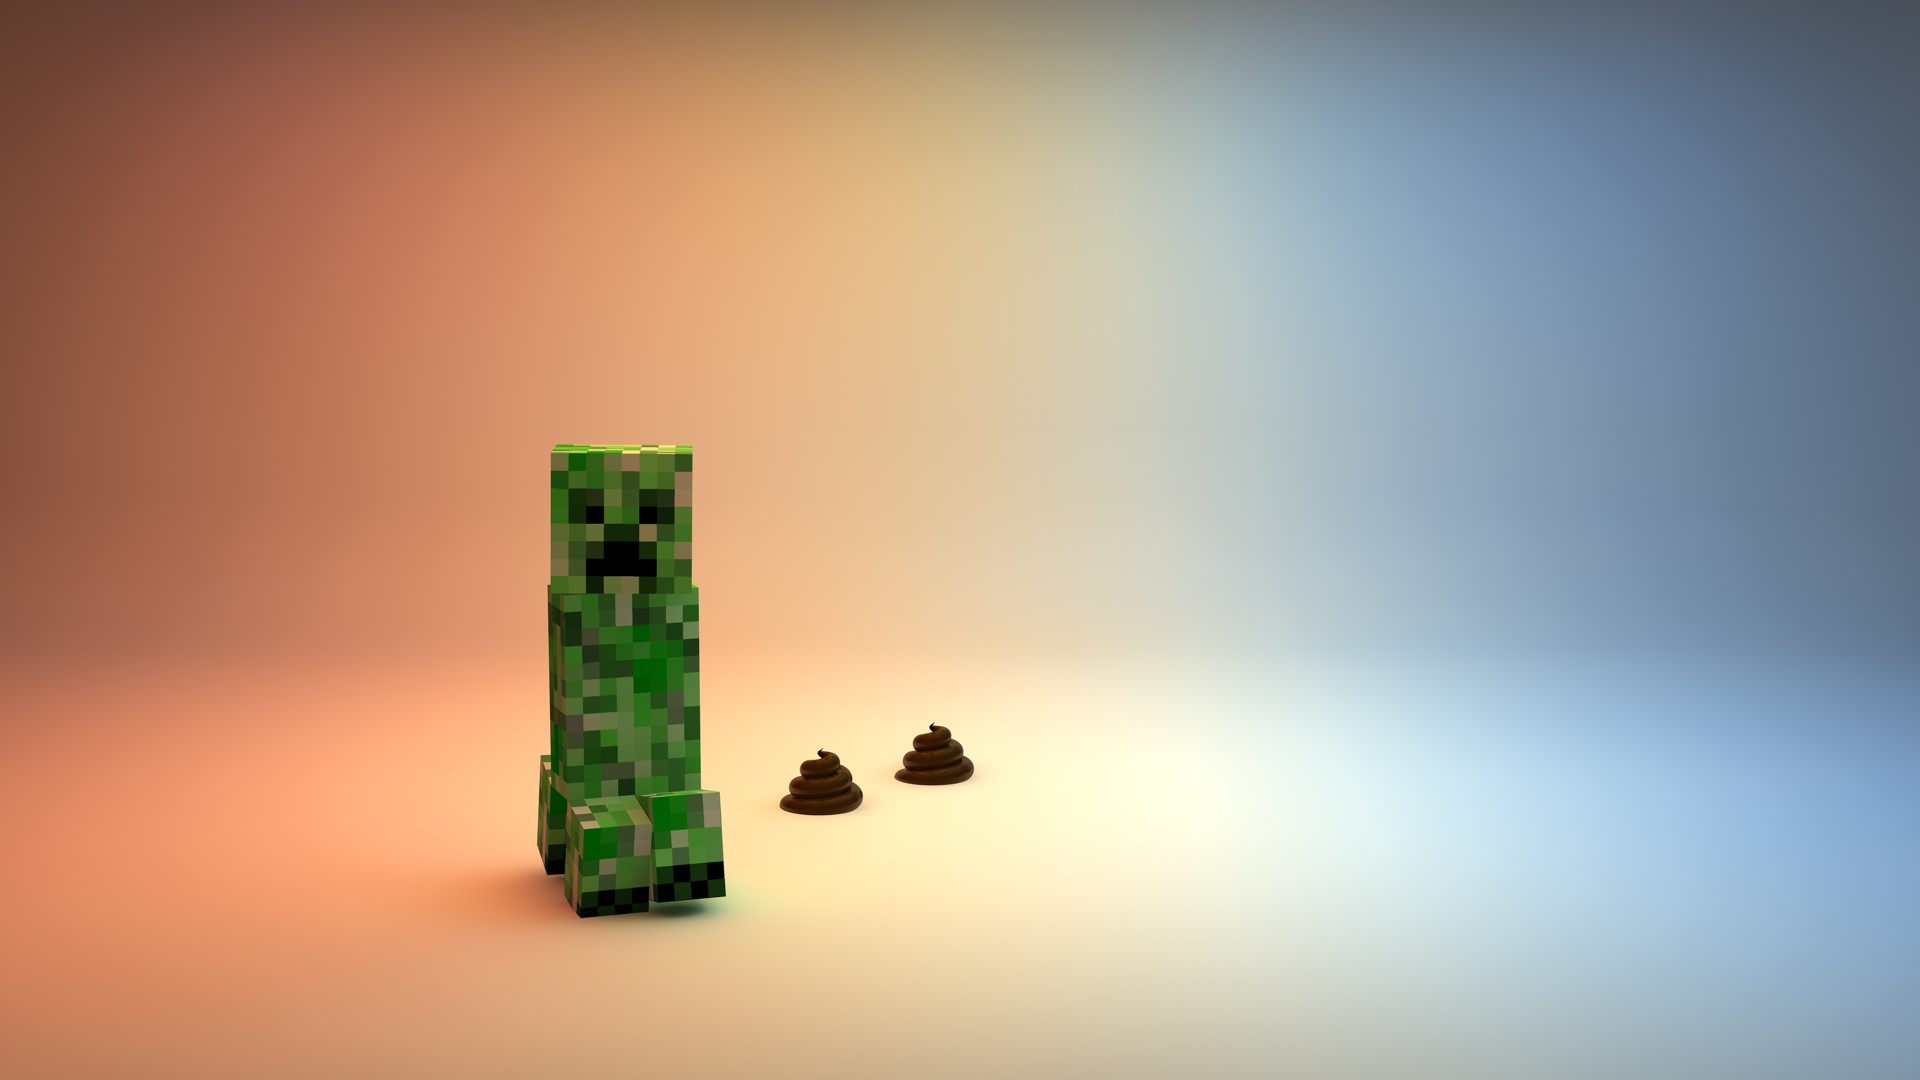 1061631 Minecraft green creeper shape symbol jewellery games  screenshot computer wallpaper fashion accessory font indoor games and  sports bling bling  Rare Gallery HD Wallpapers